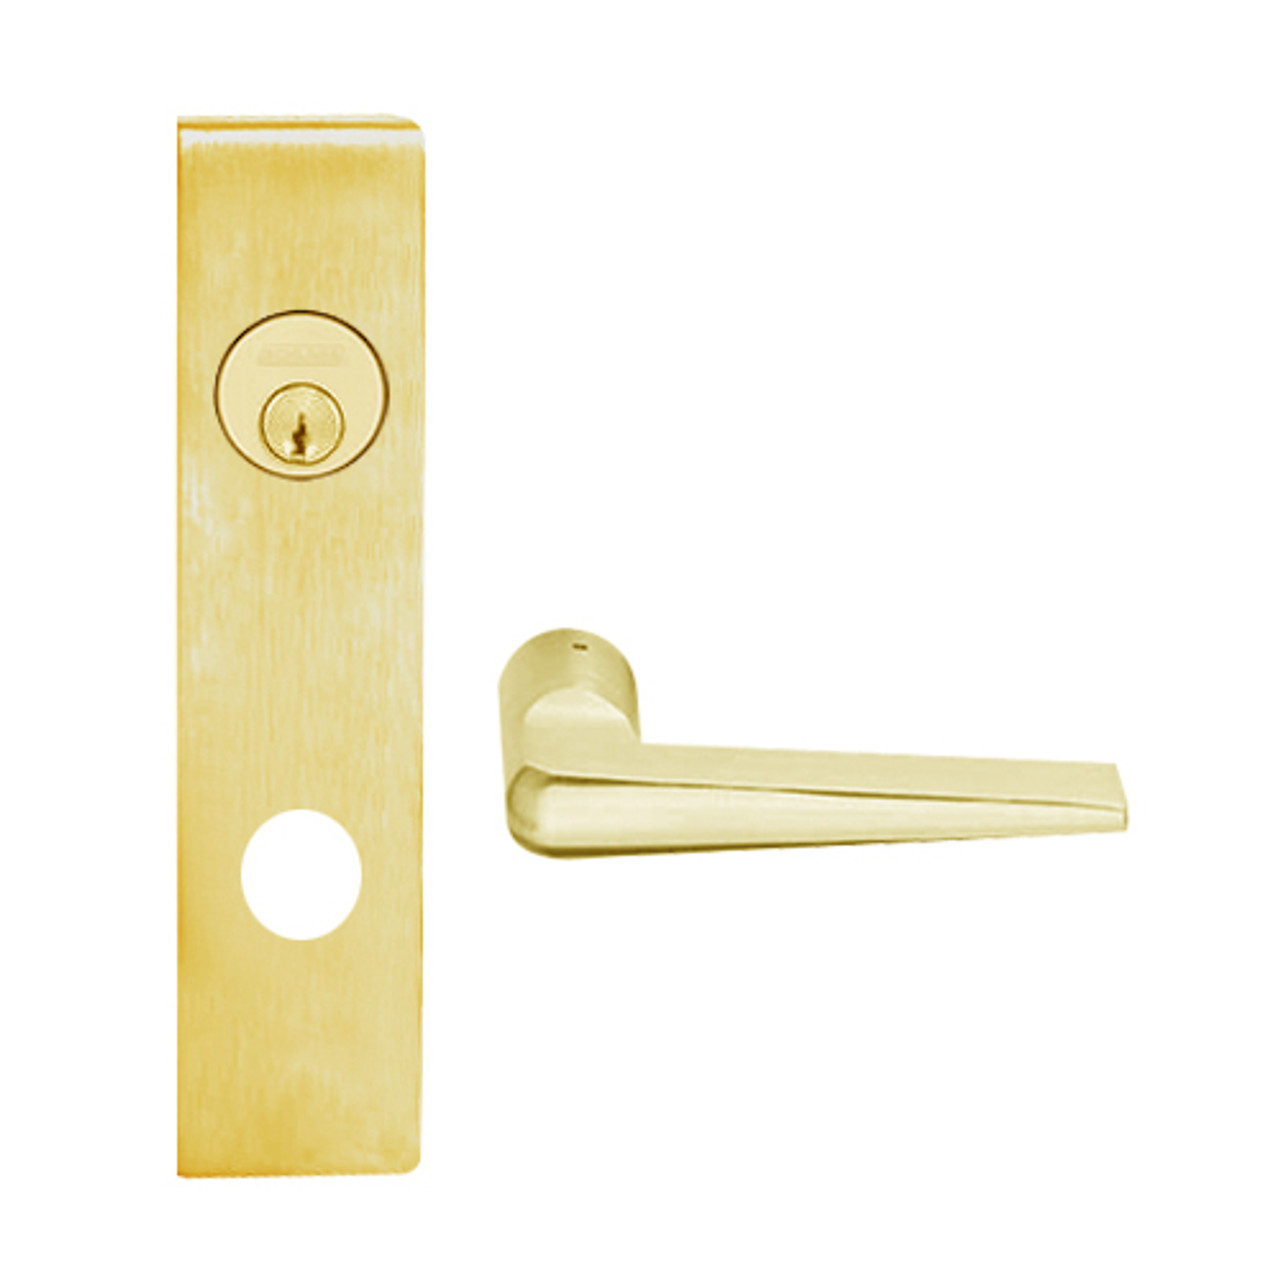 L9456L-05L-605 Schlage L Series Less Cylinder Corridor with Deadbolt Commercial Mortise Lock with 05 Cast Lever Design in Bright Brass